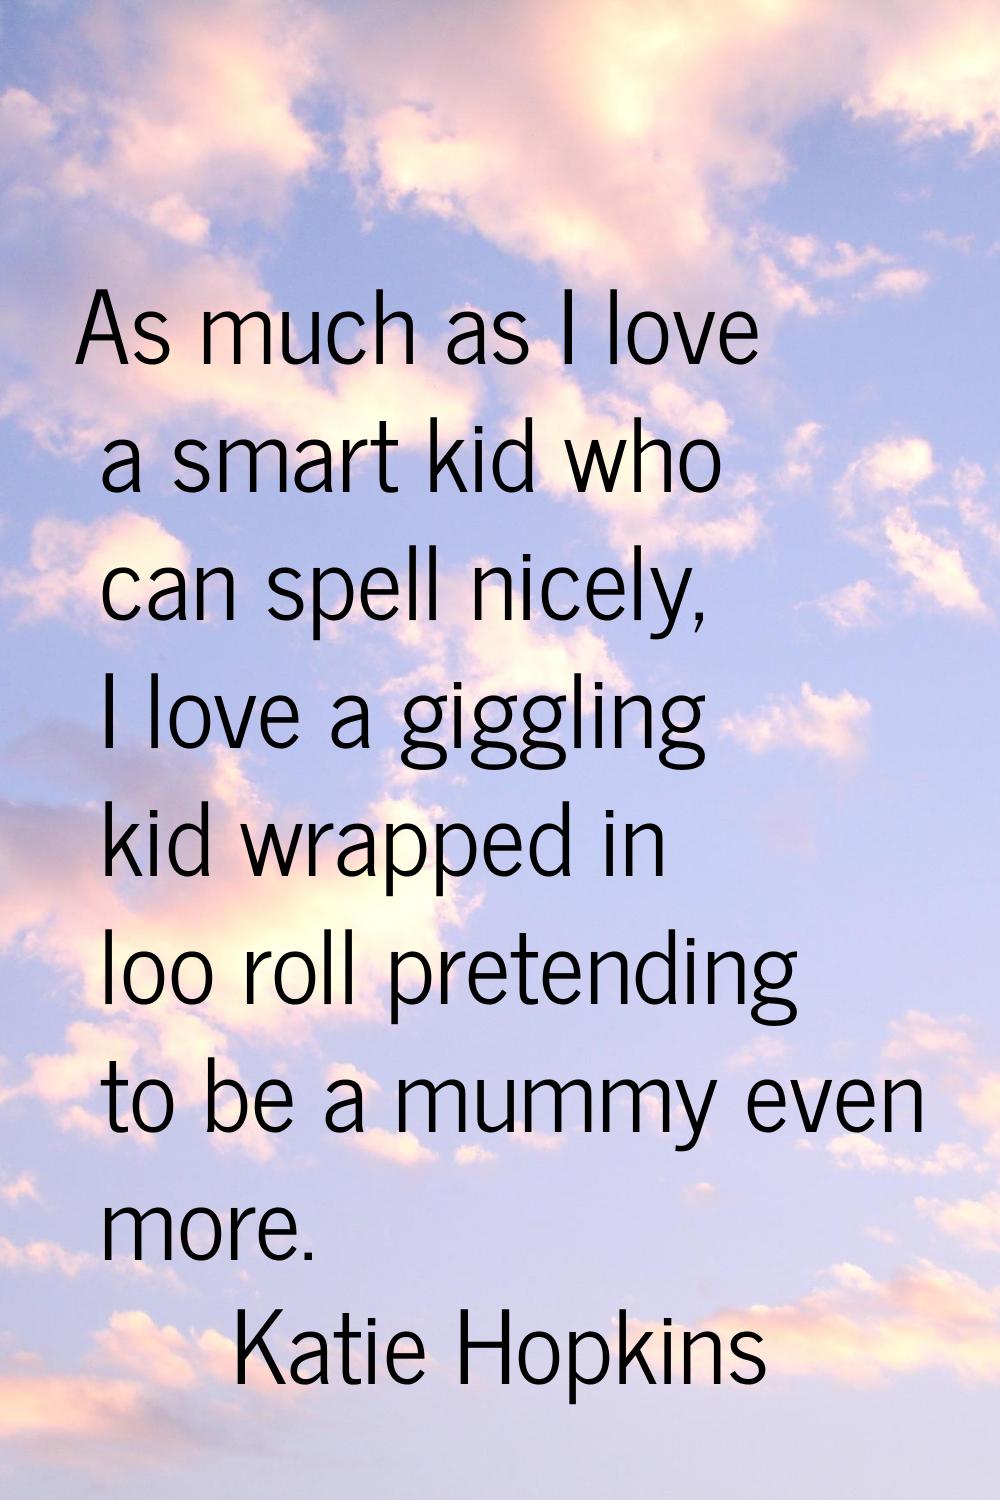 As much as I love a smart kid who can spell nicely, I love a giggling kid wrapped in loo roll prete